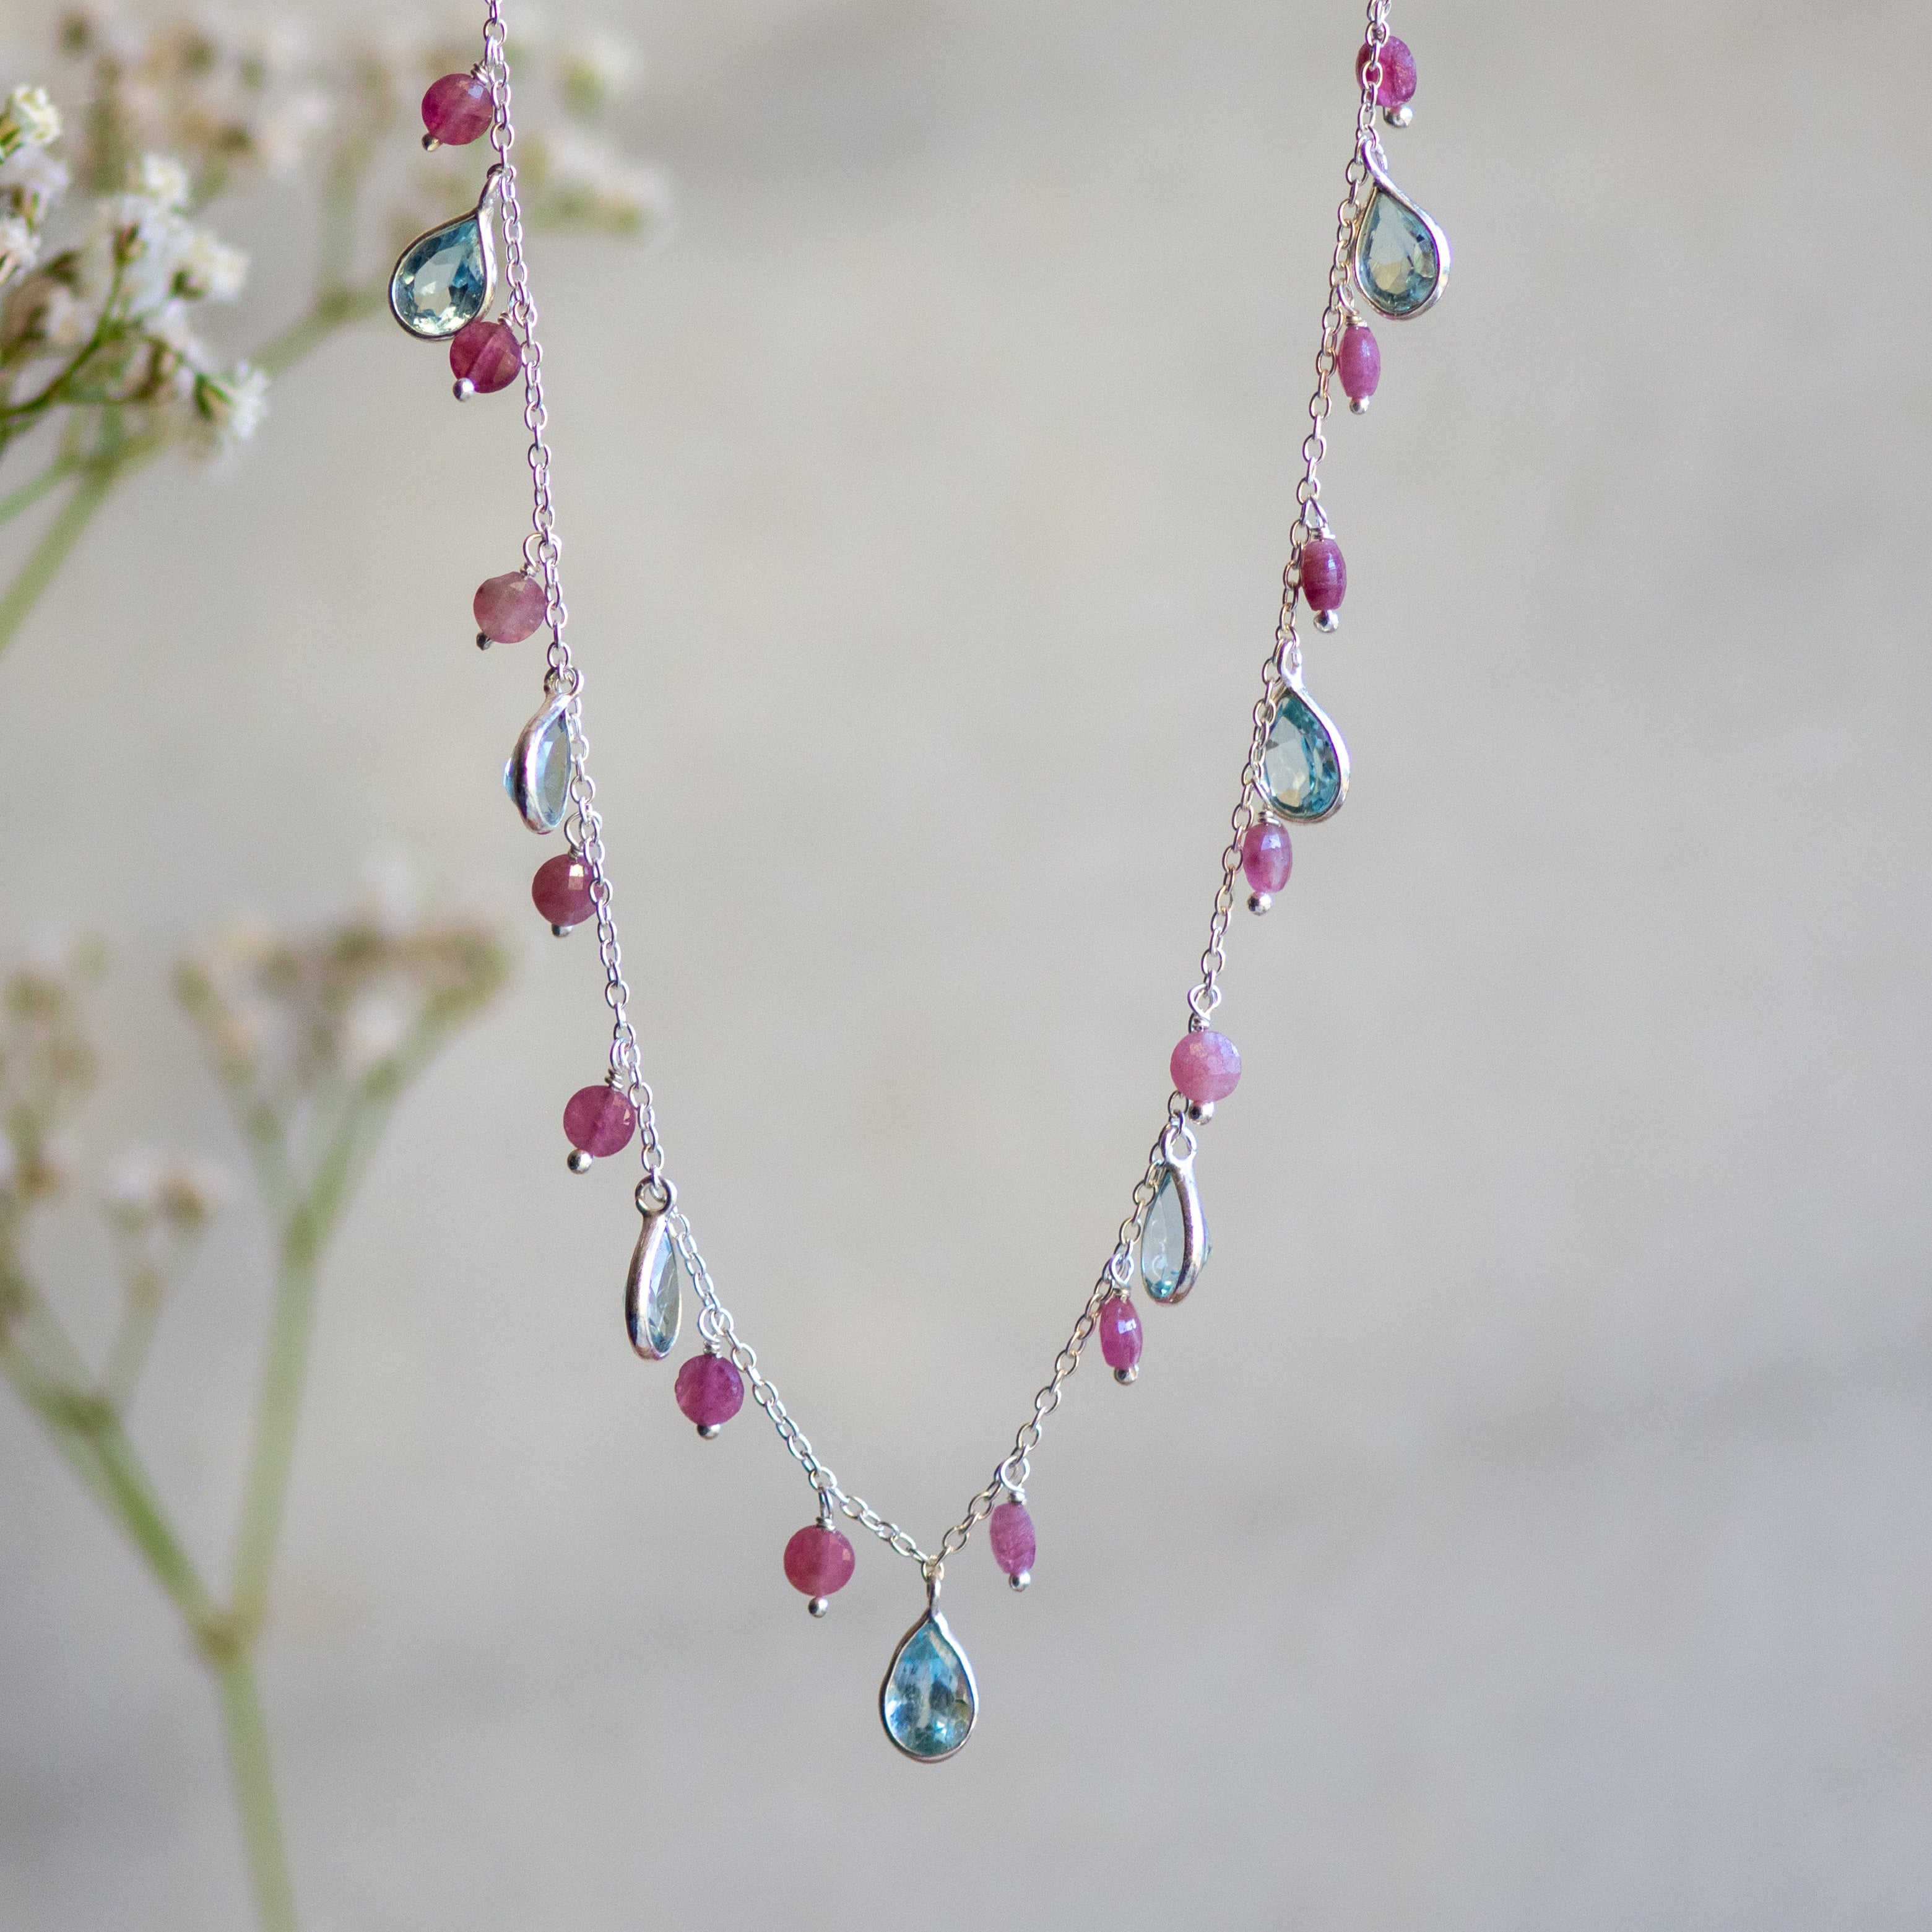 kiki silver necklace with blue topaz and pink tourmaline